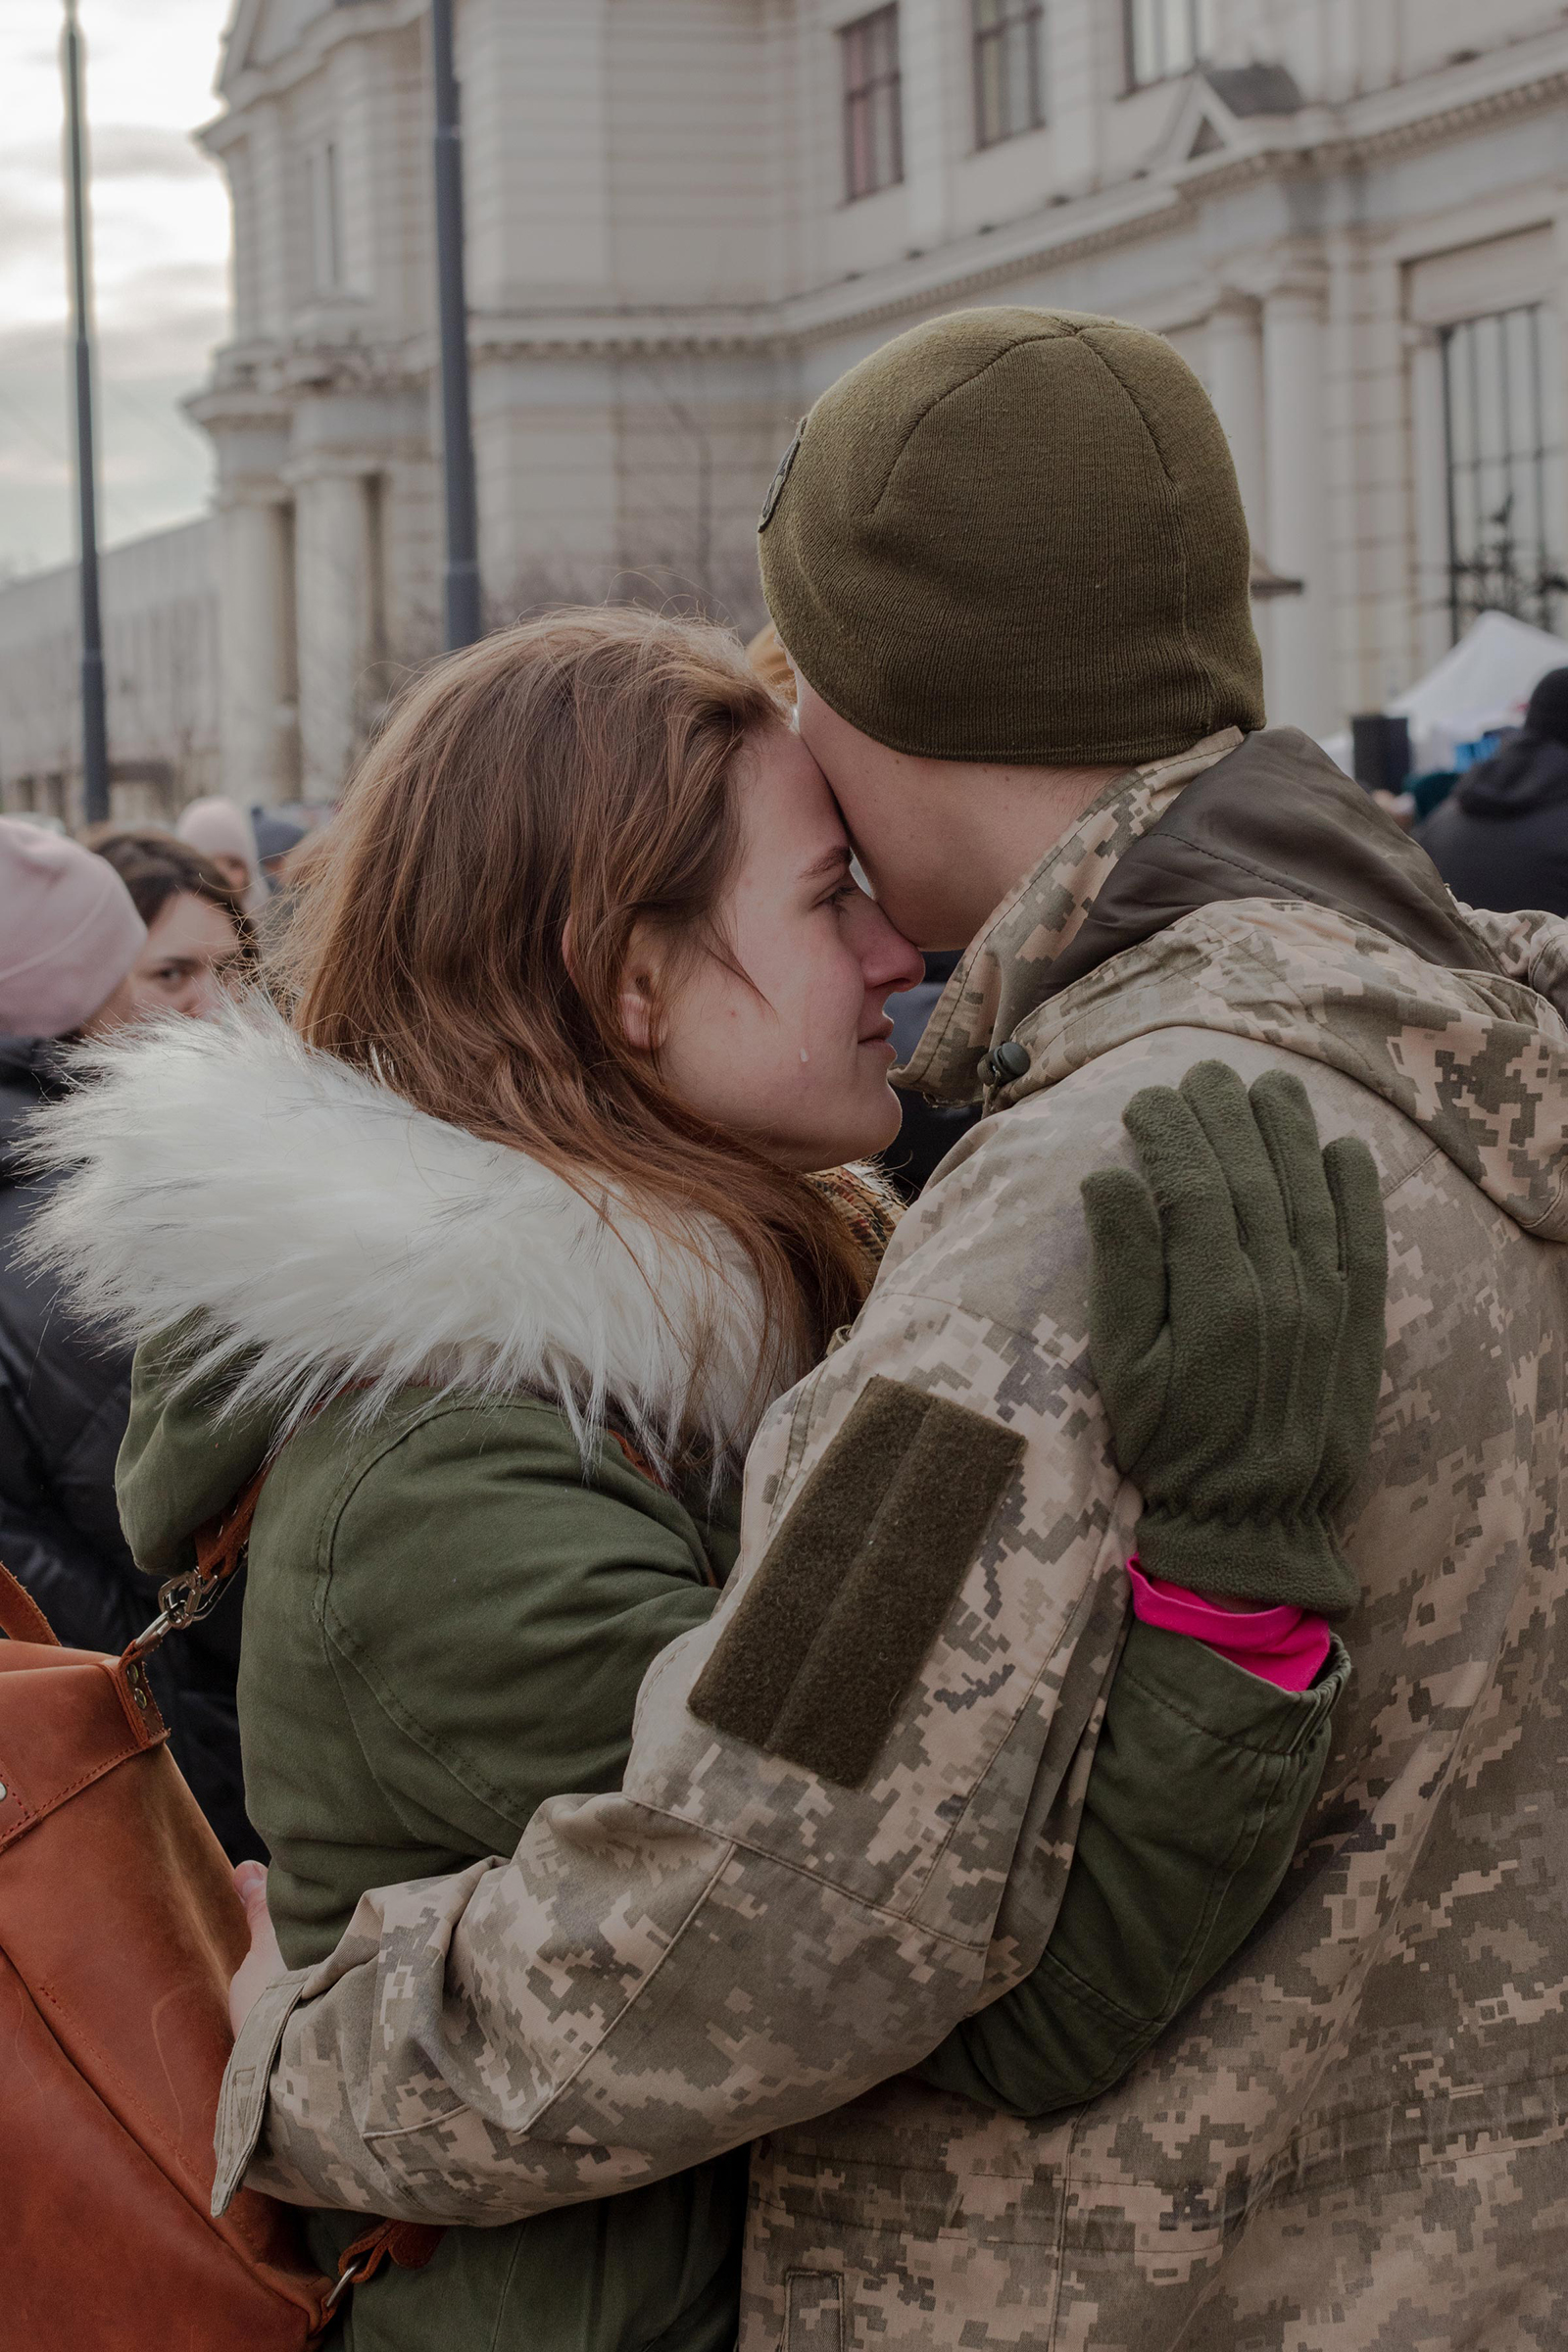 Soldiers say <a href="https://time.com/6159261/women-ukraine-war-russia/">emotional goodbyes</a> to their partners at the Lviv train station before heading to the front lines of the Ukrainian-Russian war, on March 8. (Natalie Keyssar for TIME)